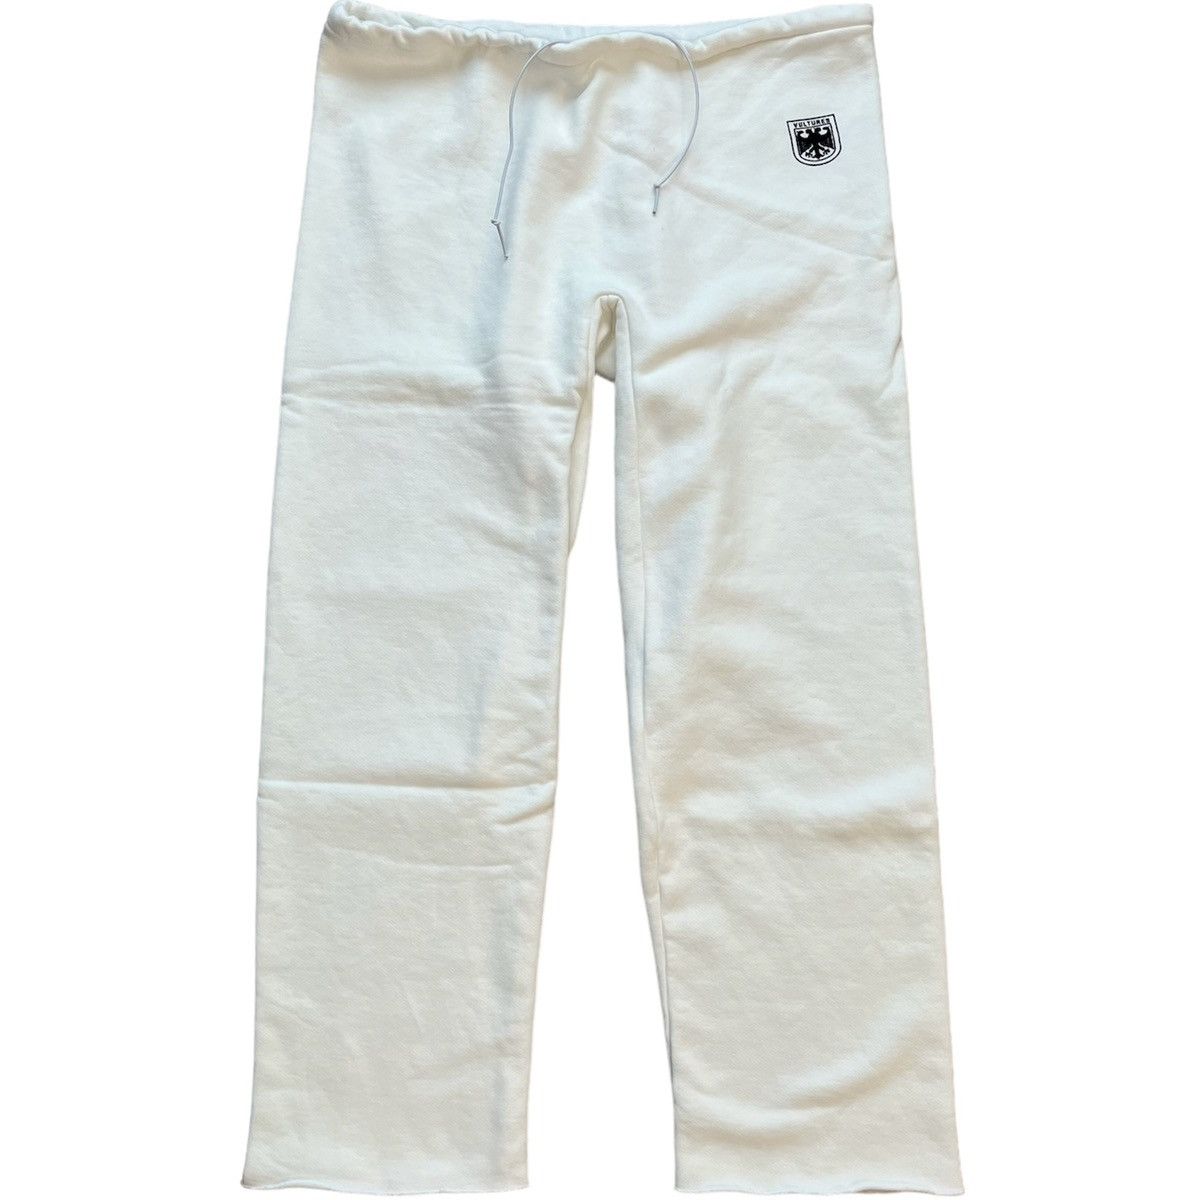 Kanye West Yzy Vultures Sweatpants White | Grailed